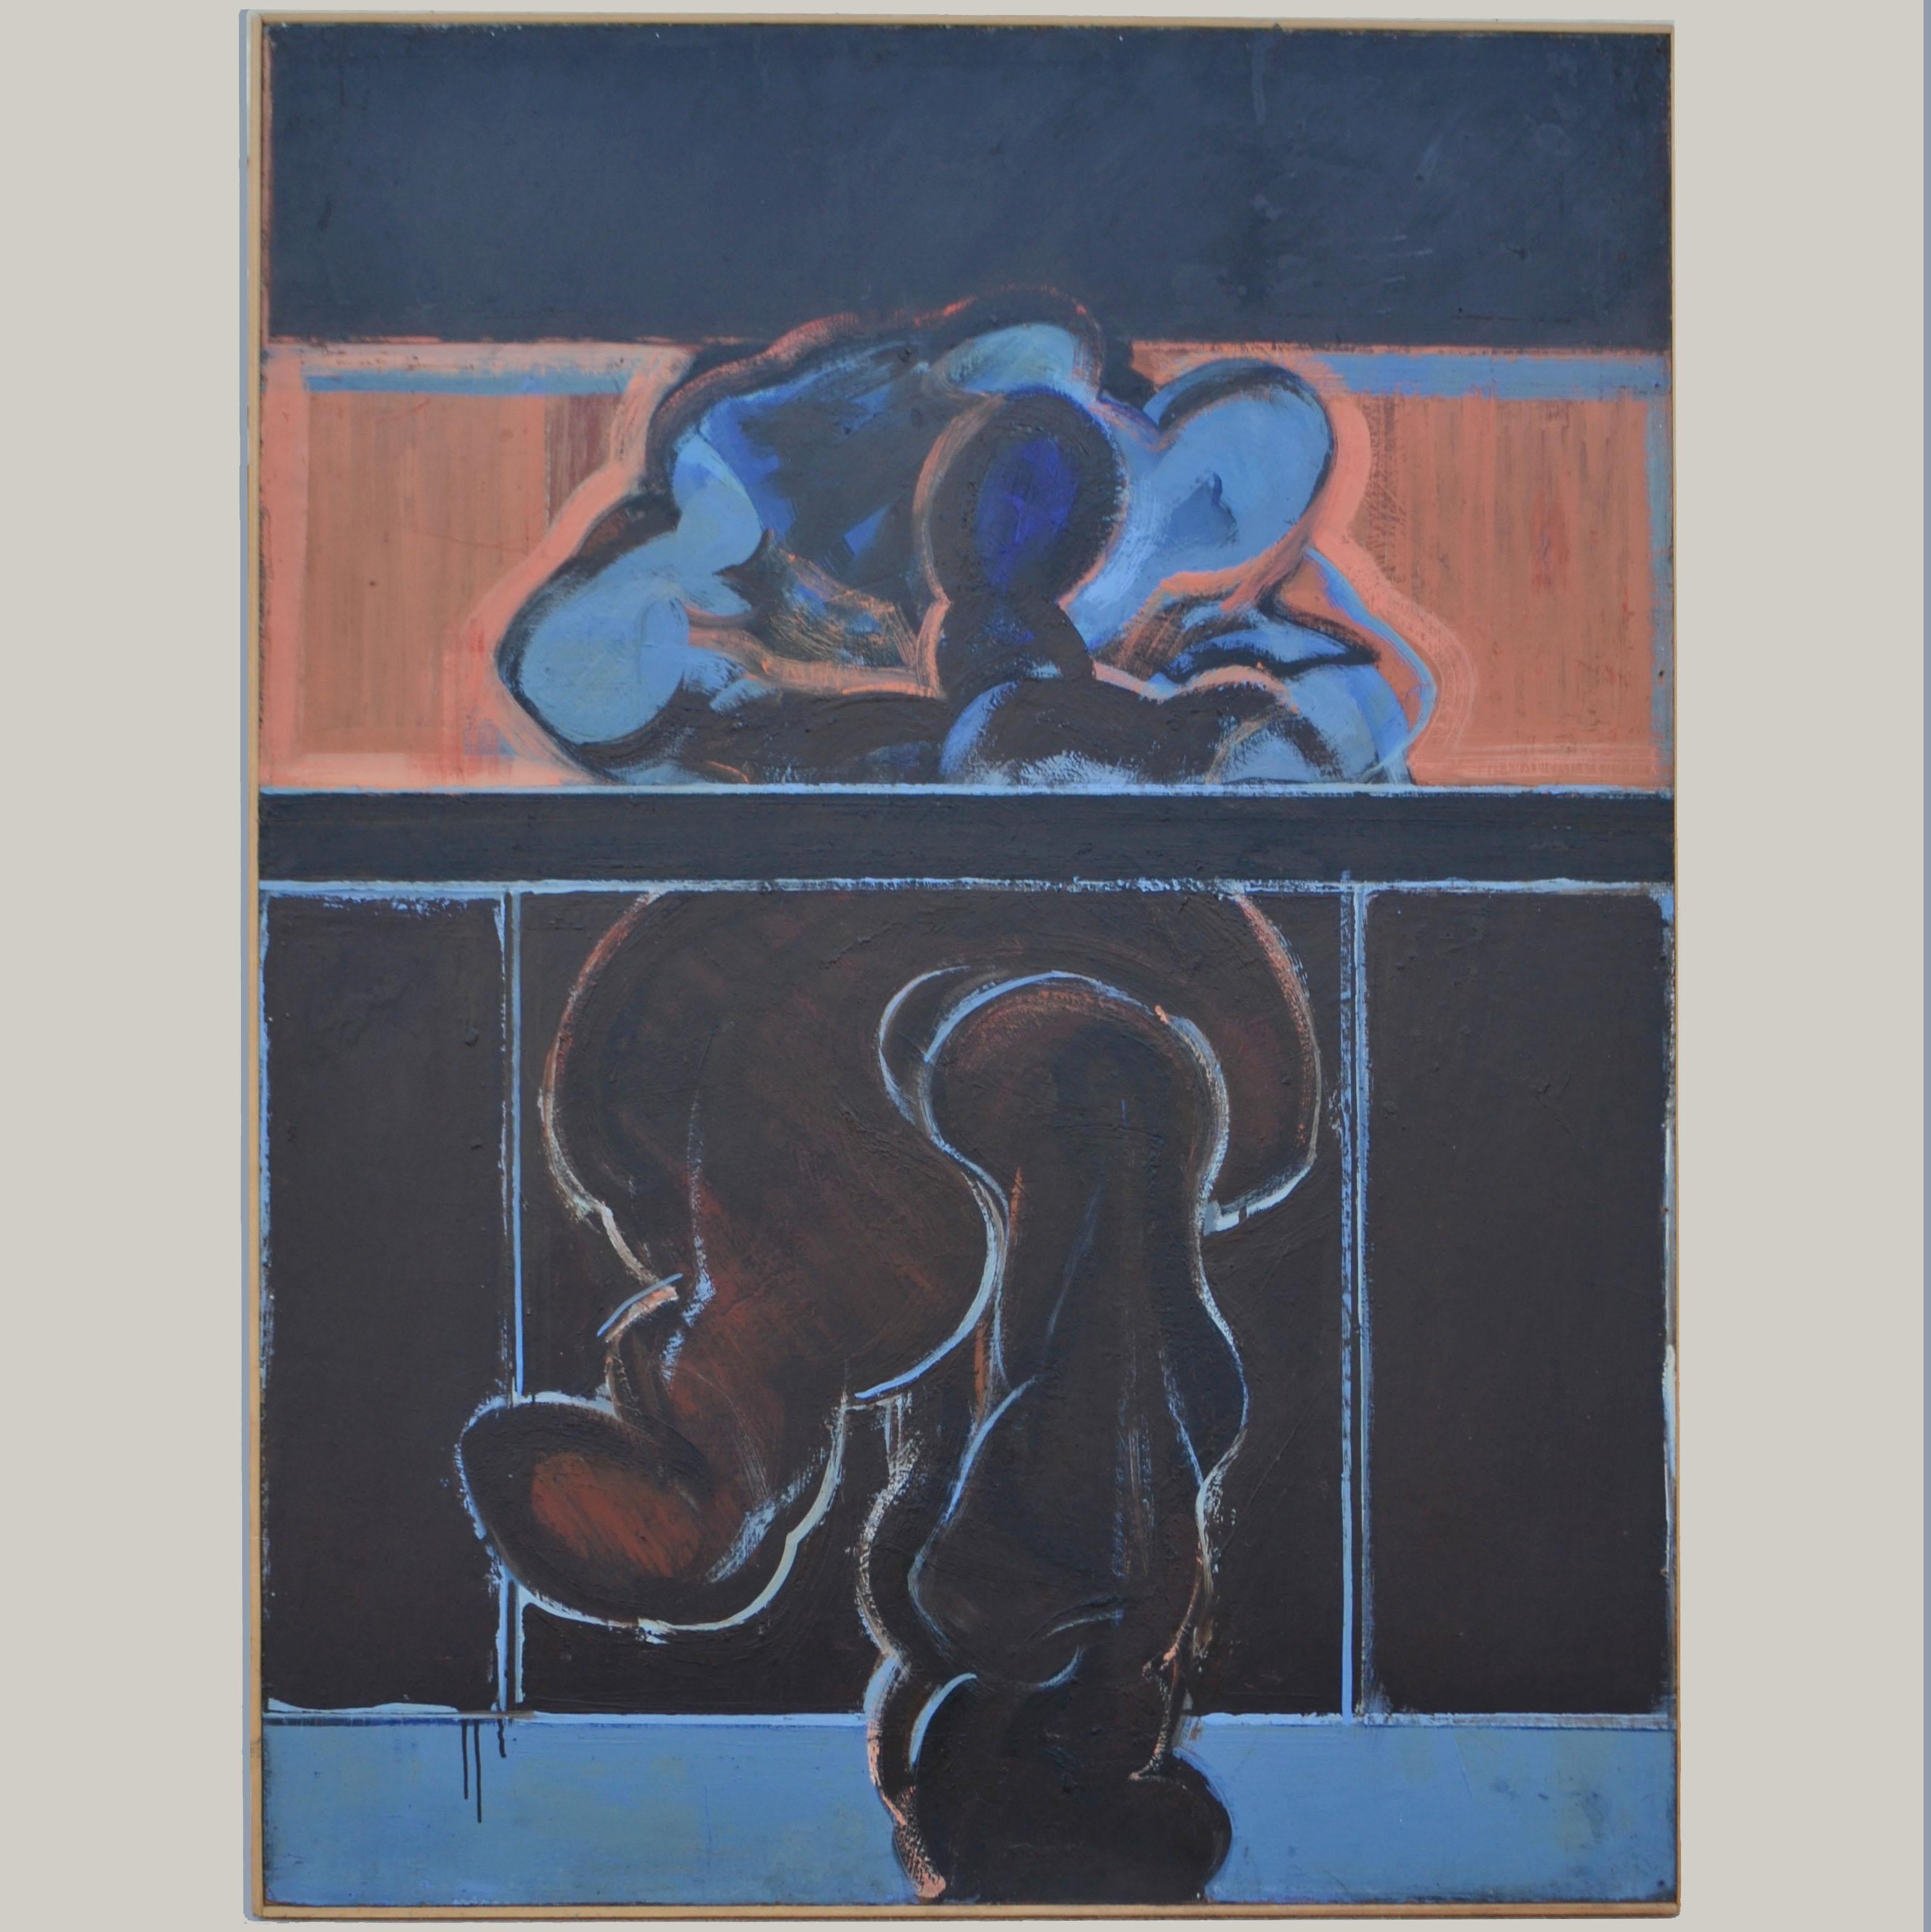 The abstract life painting of a seated figure by John Kaine 1960's was executed in acrylic paint on board framed with pine wood.
As we gaze upon what seems to a sited figure at a table or desk the painting is divided into blocks of colour above the